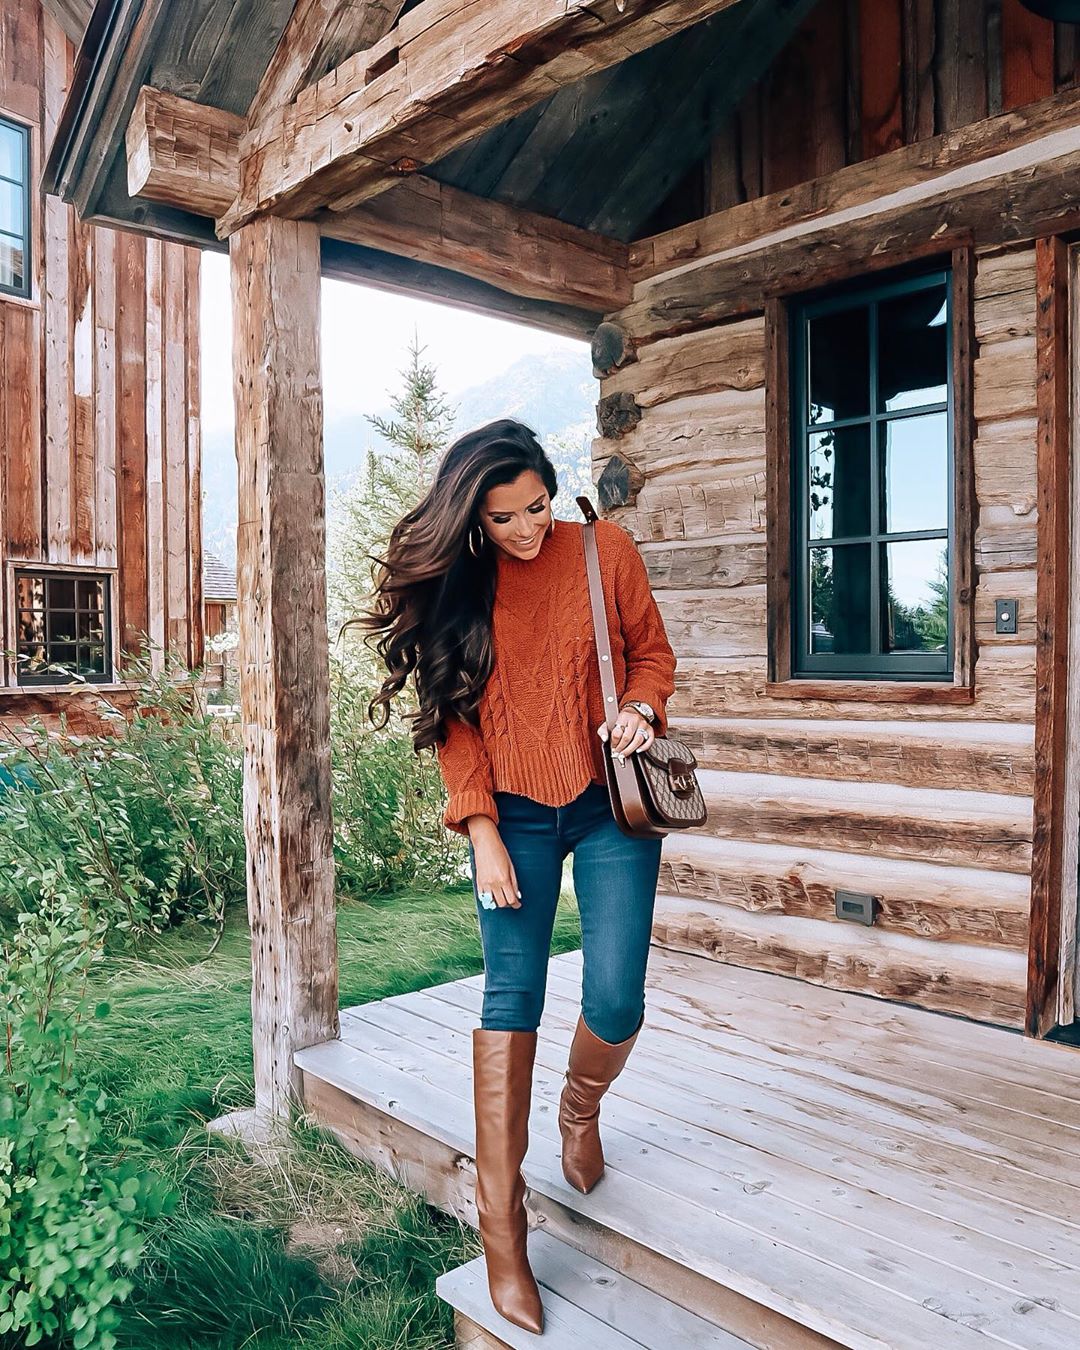 Most Popular Outfits On Sale That I've Worn - All 50% Off! by popular Oklahoma fashion blog, The Sweetest Thing: image of a woman wearing Mid Rise Denim Perfect Lift Dark Wash Leggings.